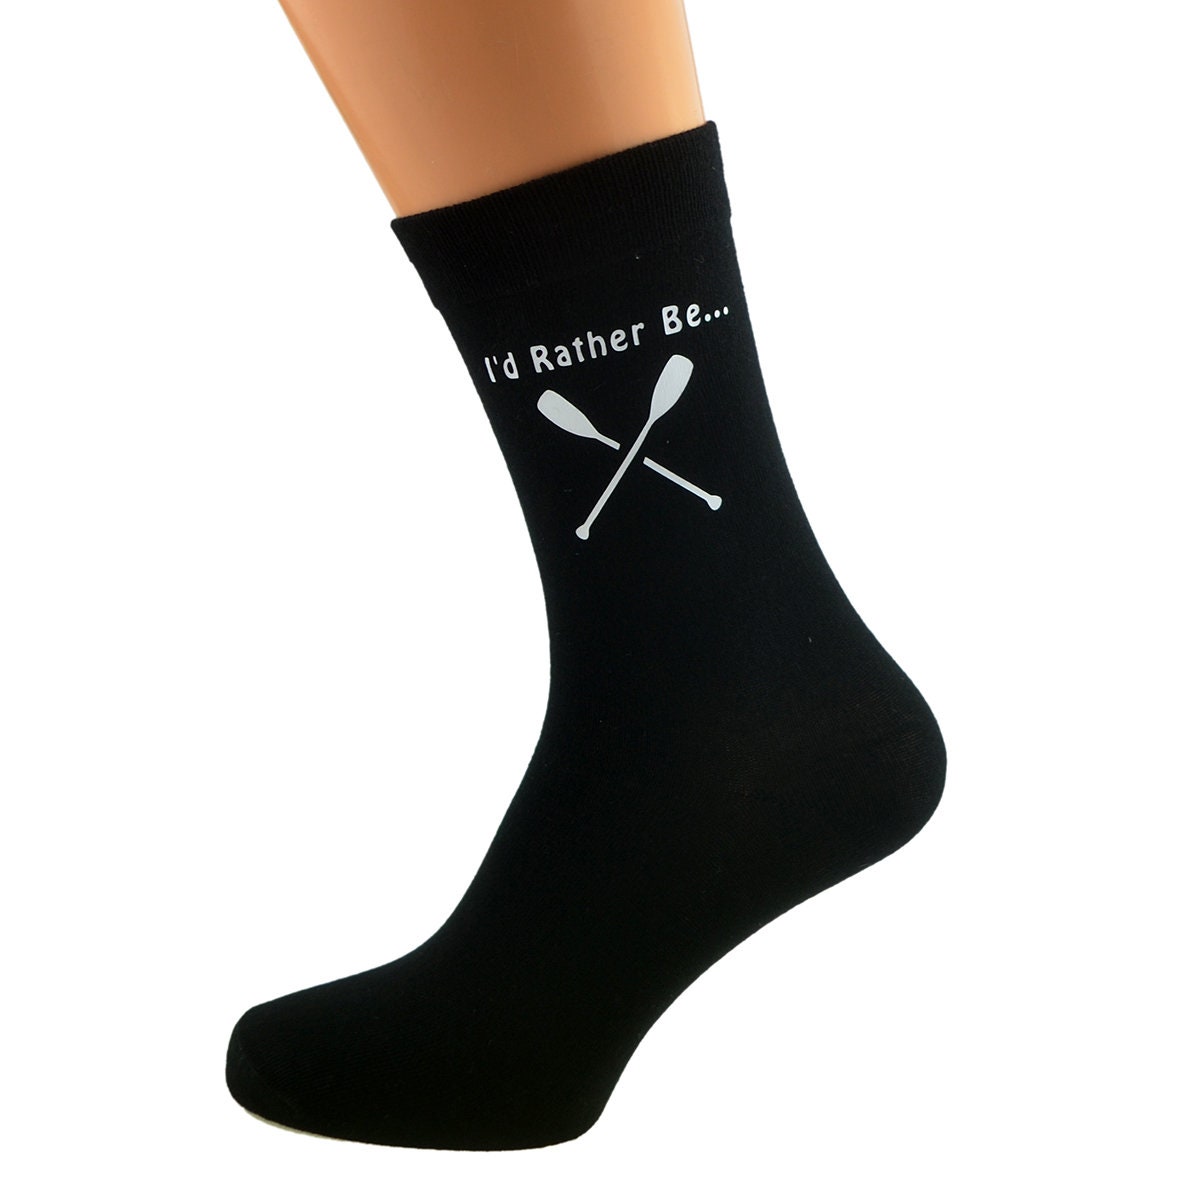 I’d Rather Be Rowing With Oars Image Printed in White Vinyl On Mens Black Cotton Rich Socks Great. One Size, UK 8-12